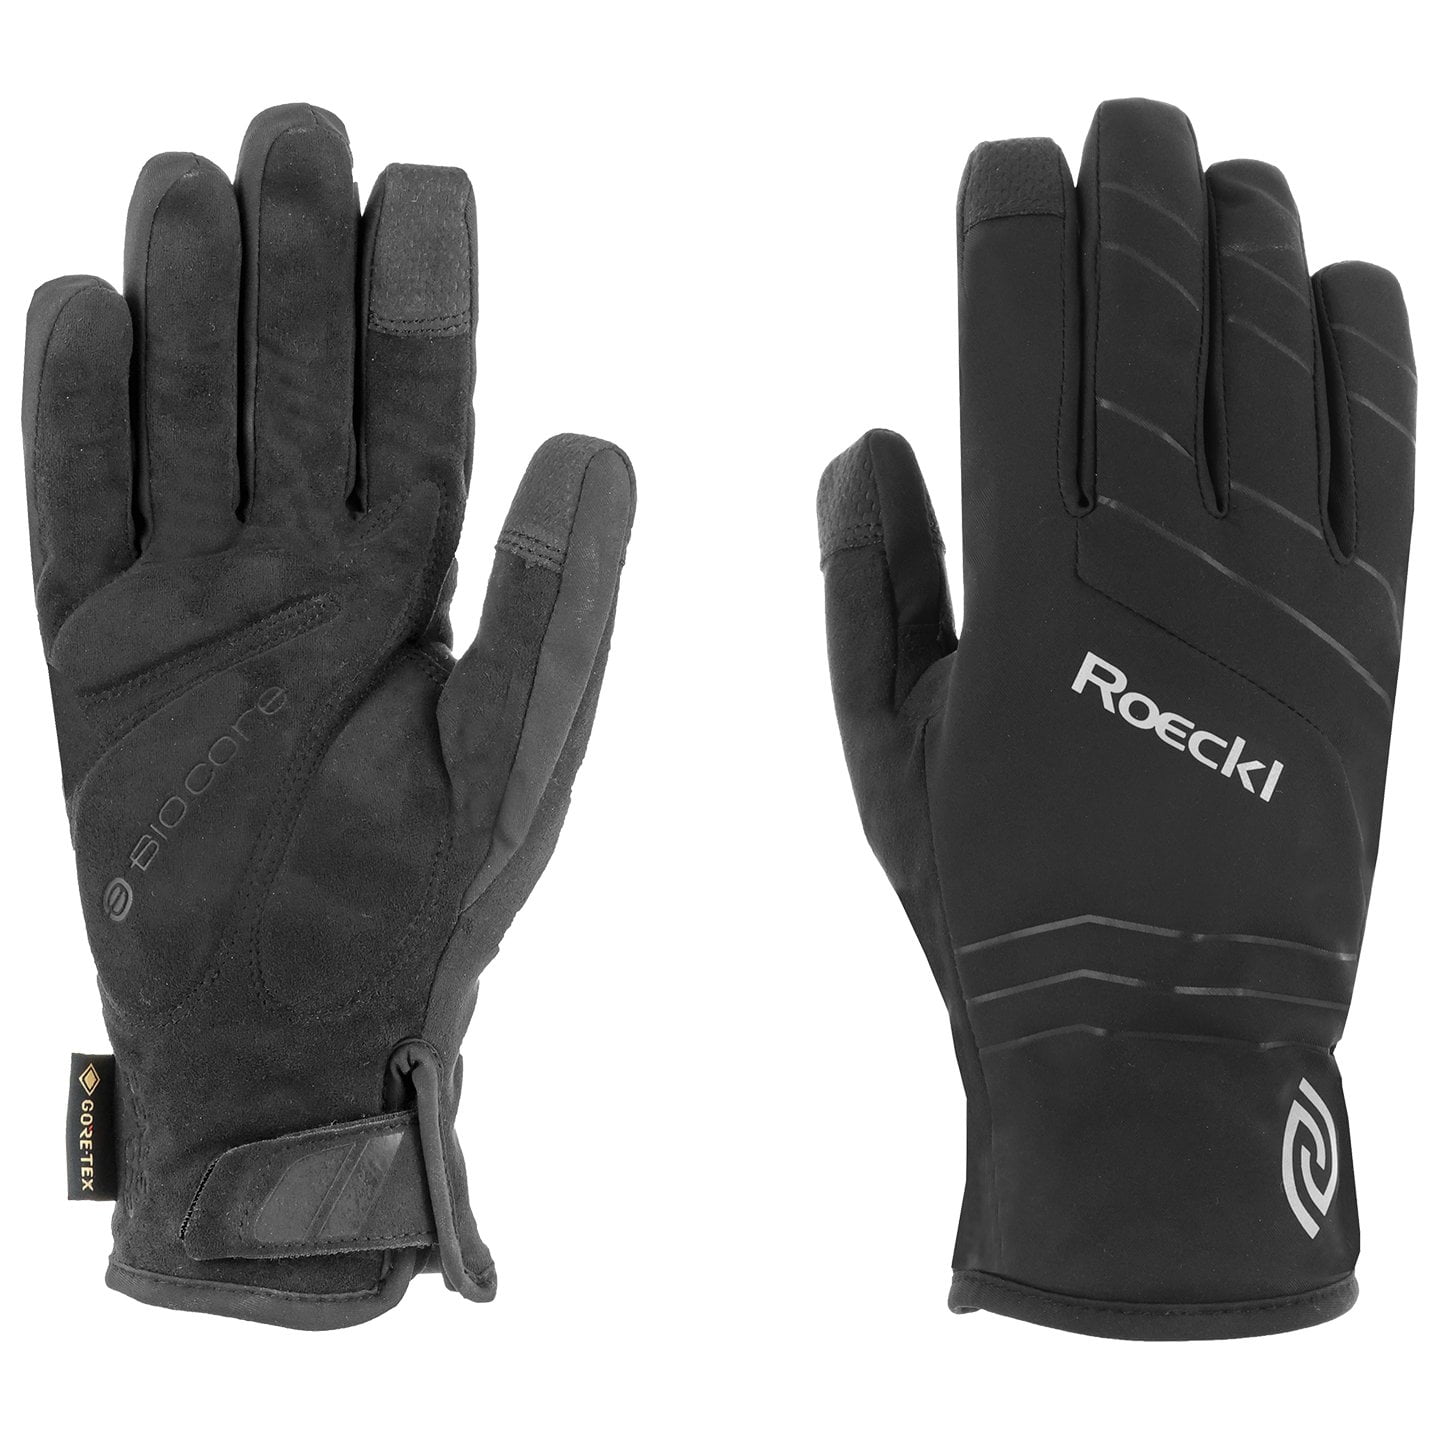 ROECKL Rosegg GTX Winter Gloves Winter Cycling Gloves, for men, size 7,5, MTB gloves, MTB clothing